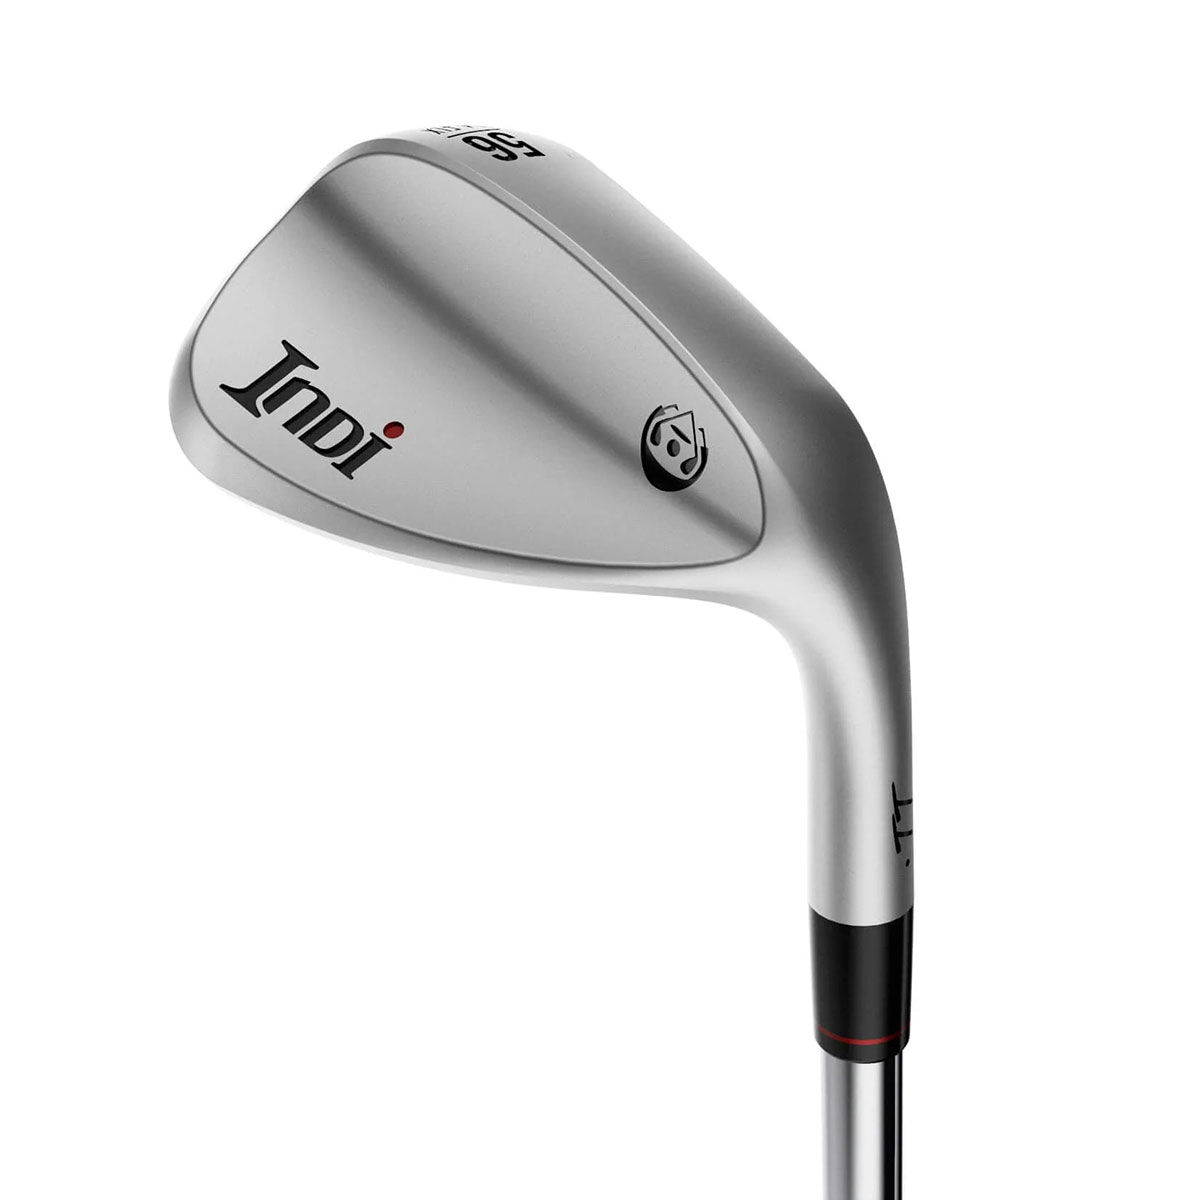 INDI FLX S Grind Steel Golf Wedge, Mens, Right hand, 58 flx grind, Steel | American Golf von Indi Golf